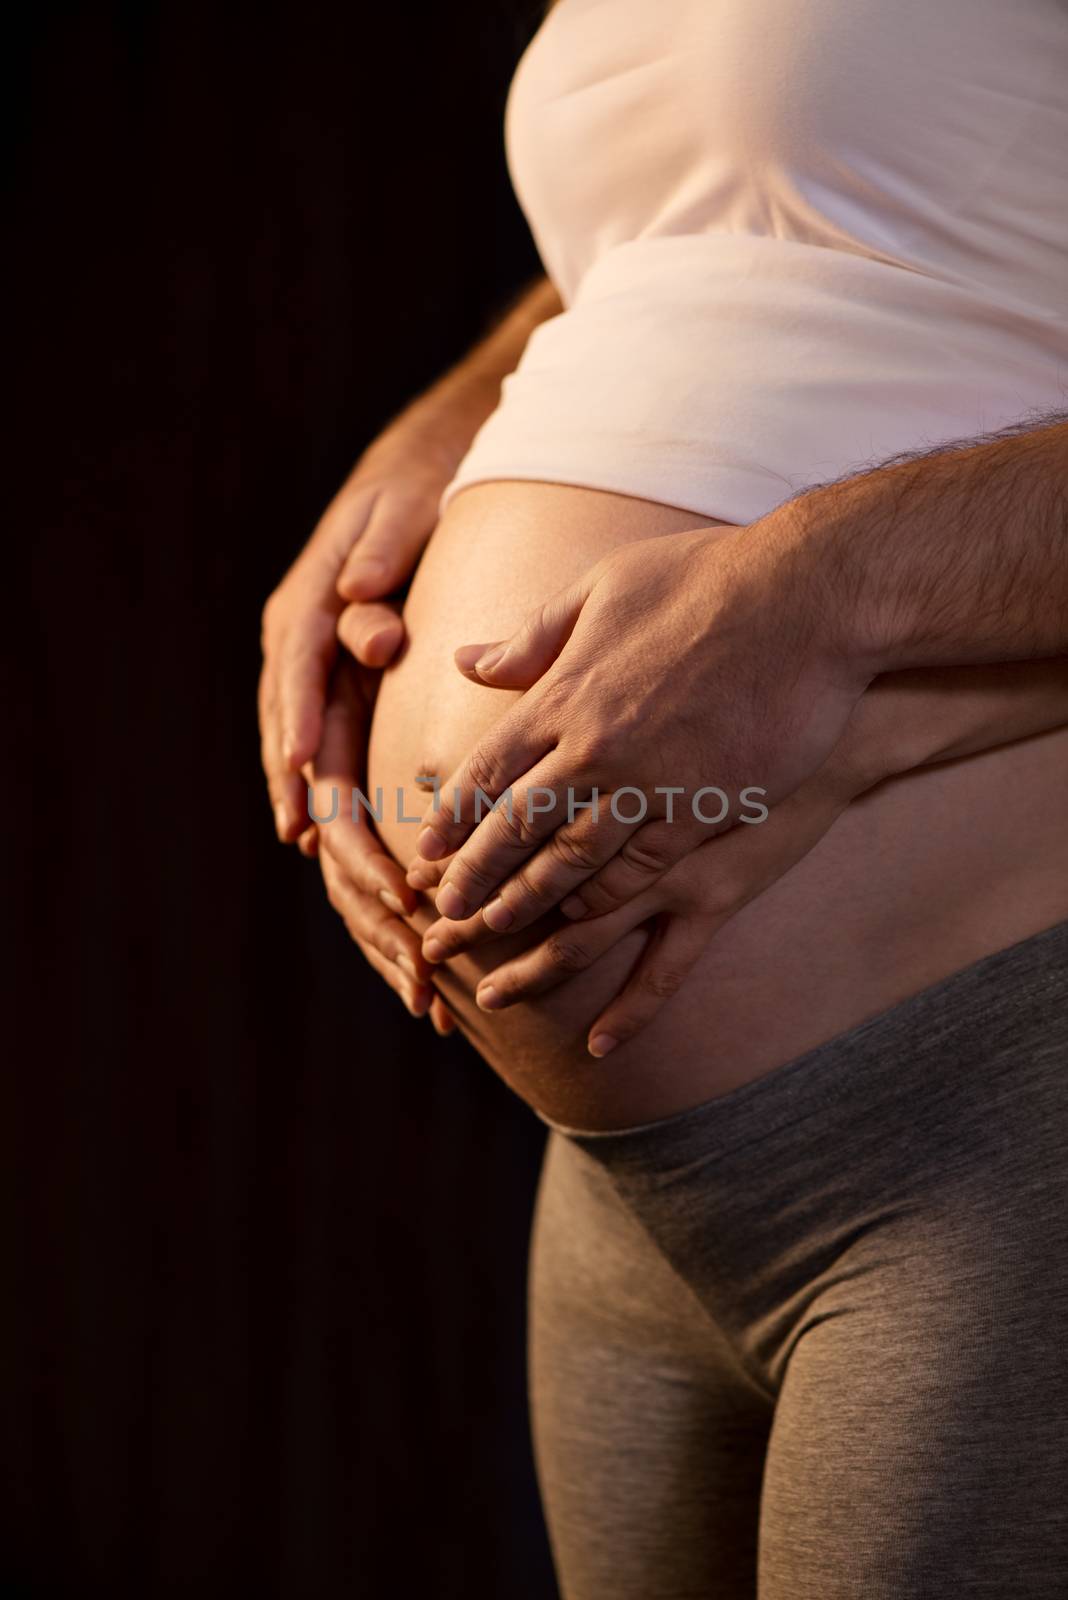 Male And Female Hands On A Pregnant Belly by MilanMarkovic78